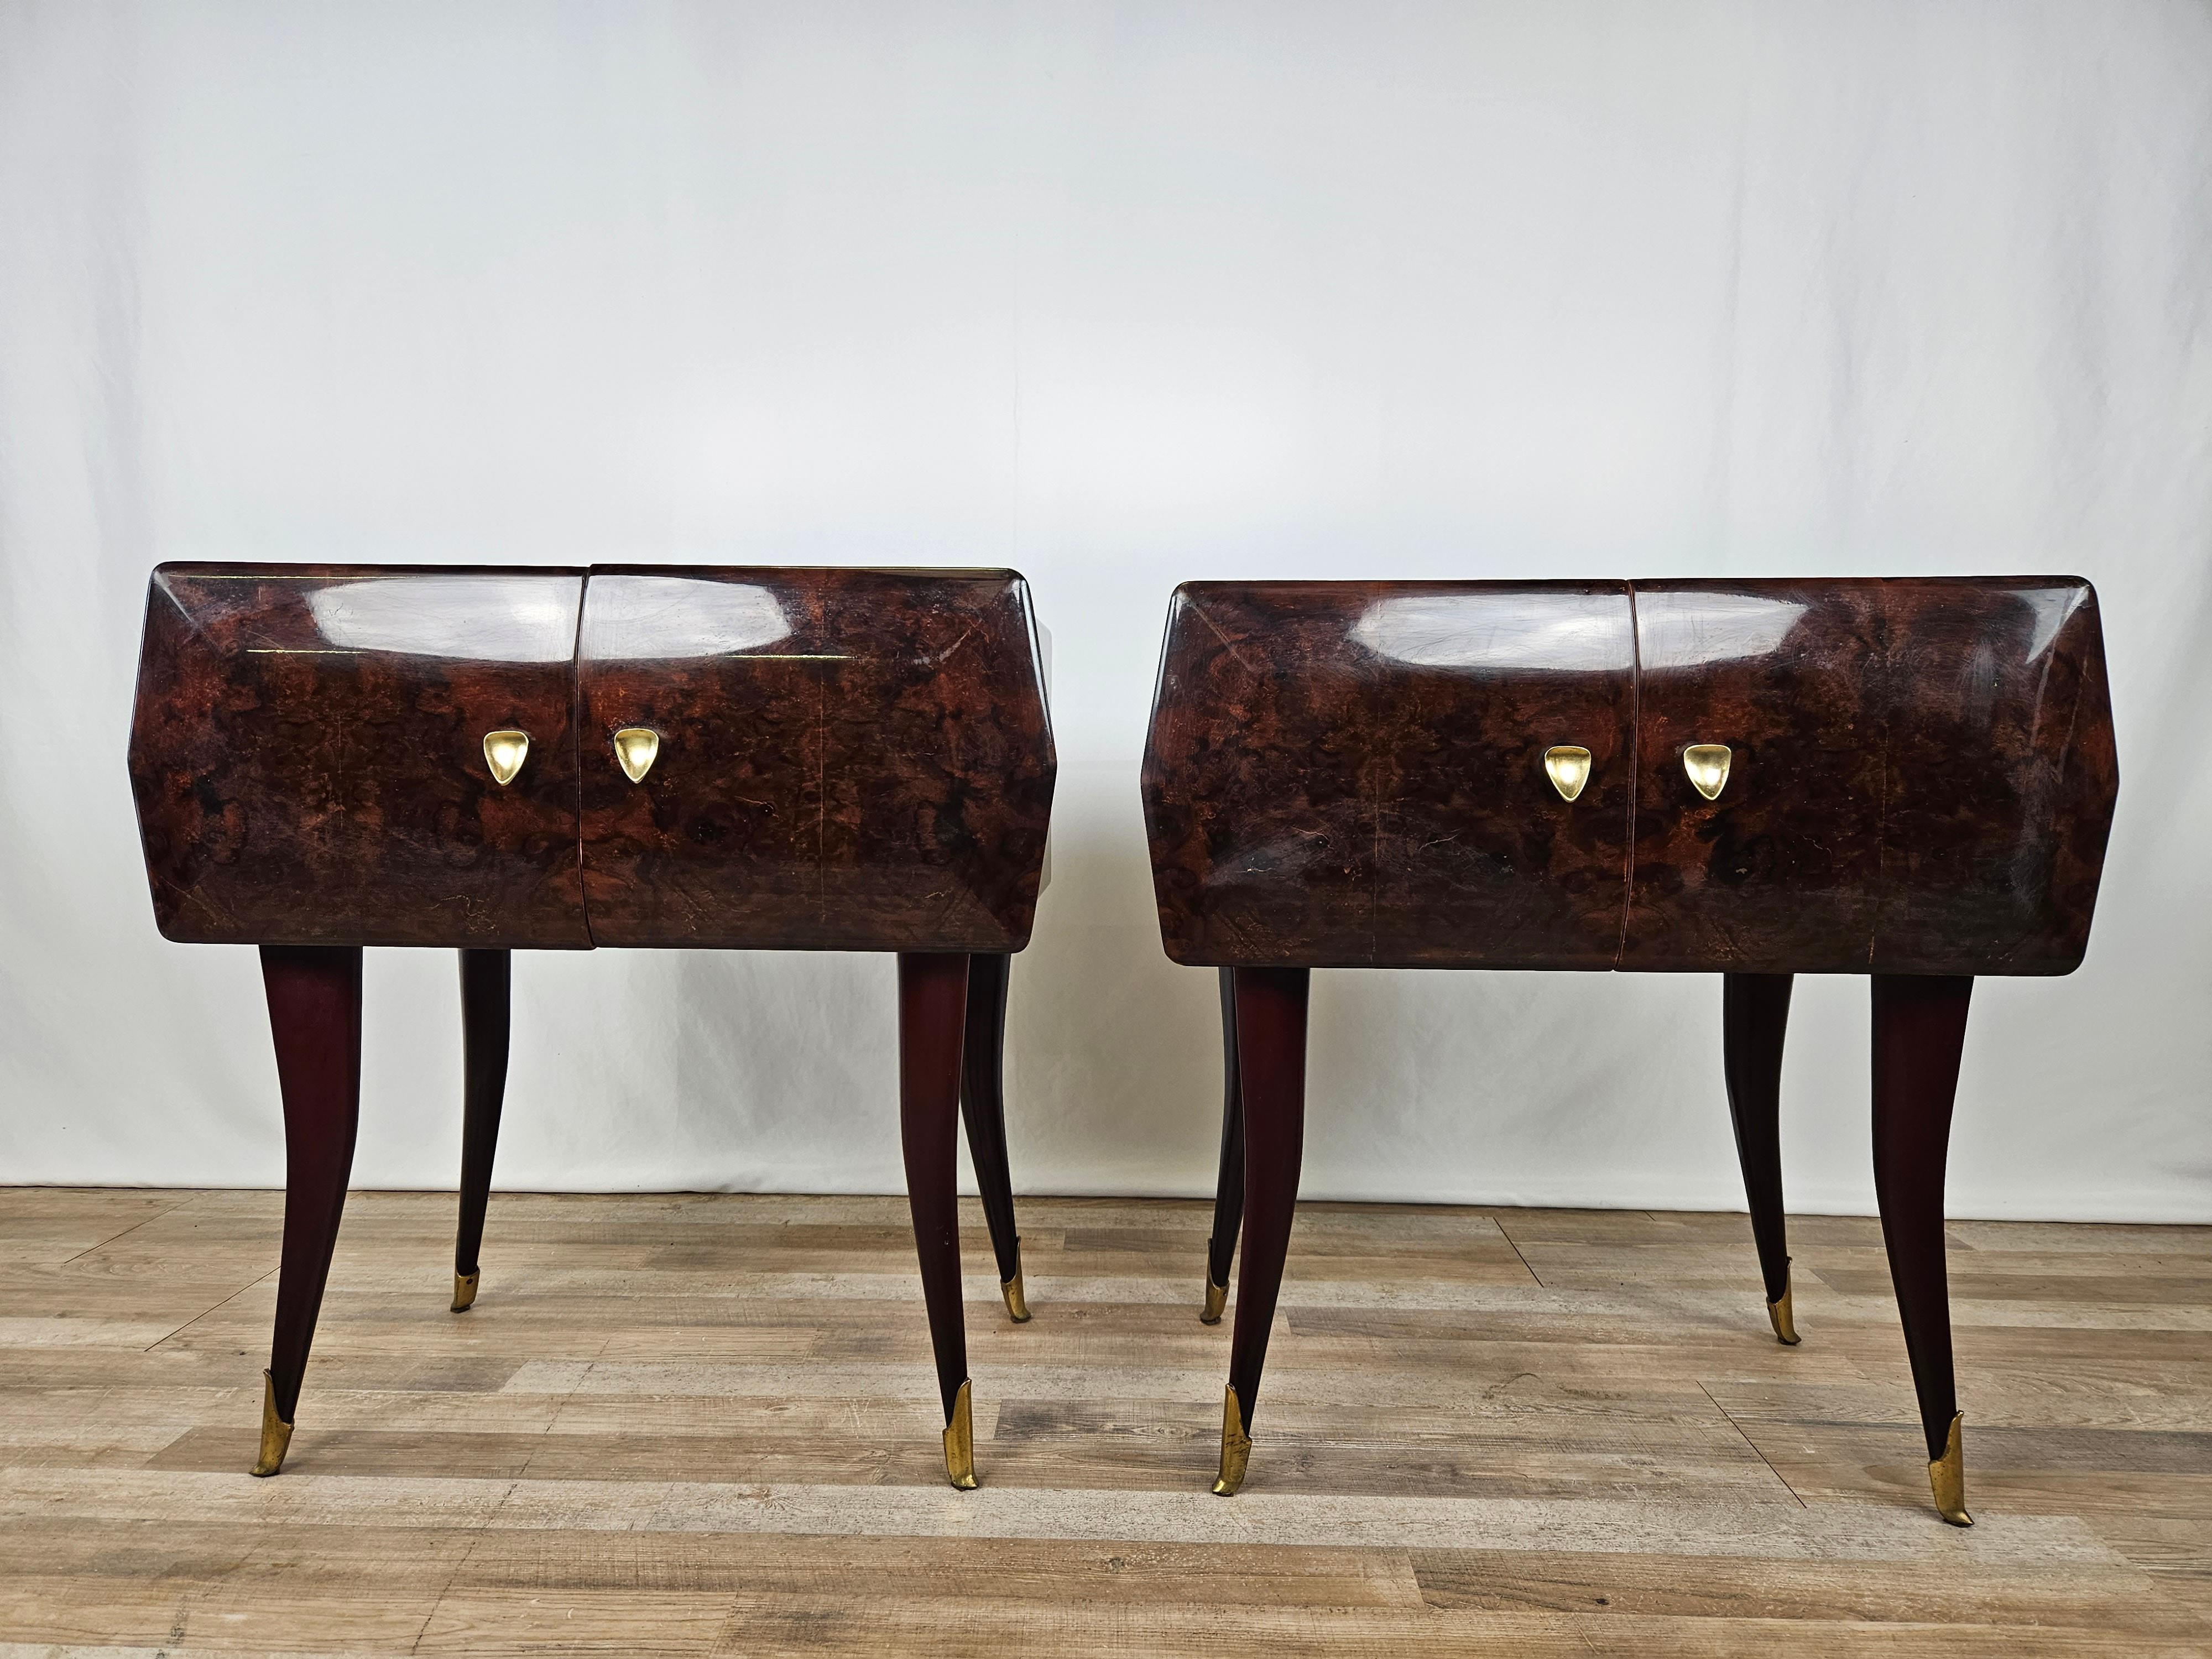 Elegant pair of Italian Mid Century bedside tables circa early 1950s, in rosewood with maple interior and pink glass top.

Fine, simple, and with a modern, straightforward line, they go well with any kind of modern or antique environment.

The